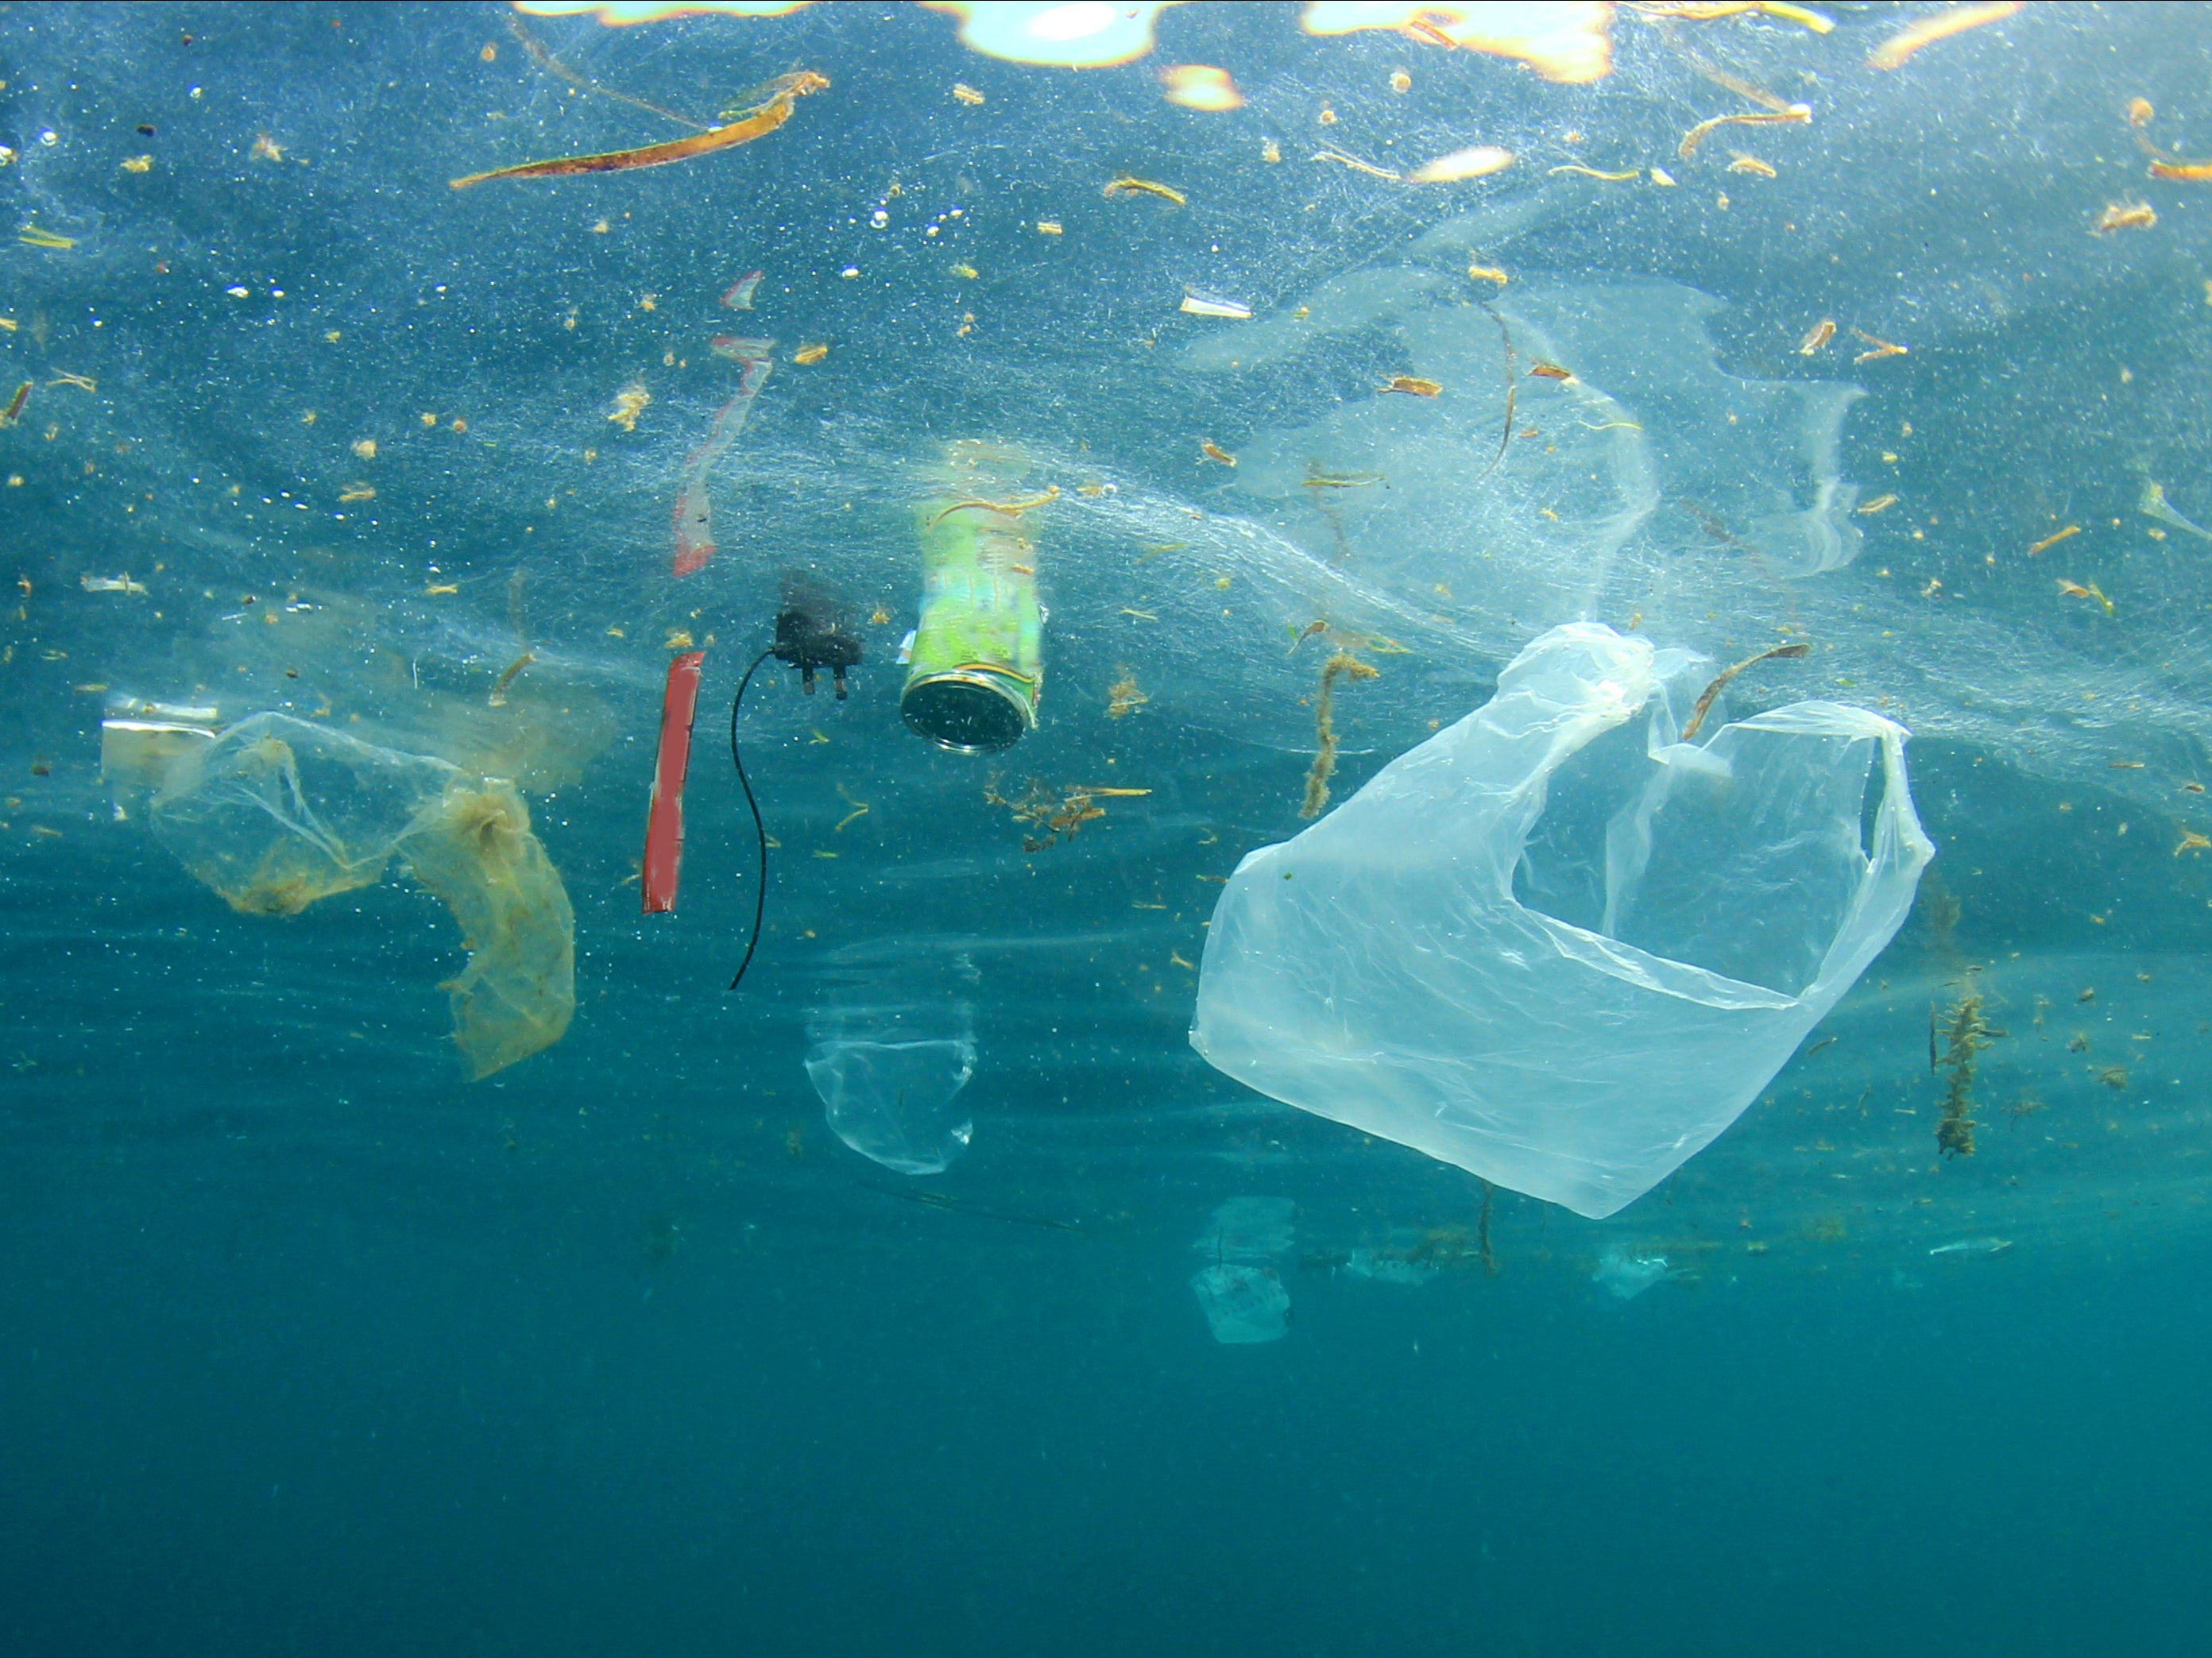 Issues of plastic waste in seas go beyond just ingestion and entanglement, scientists have warned